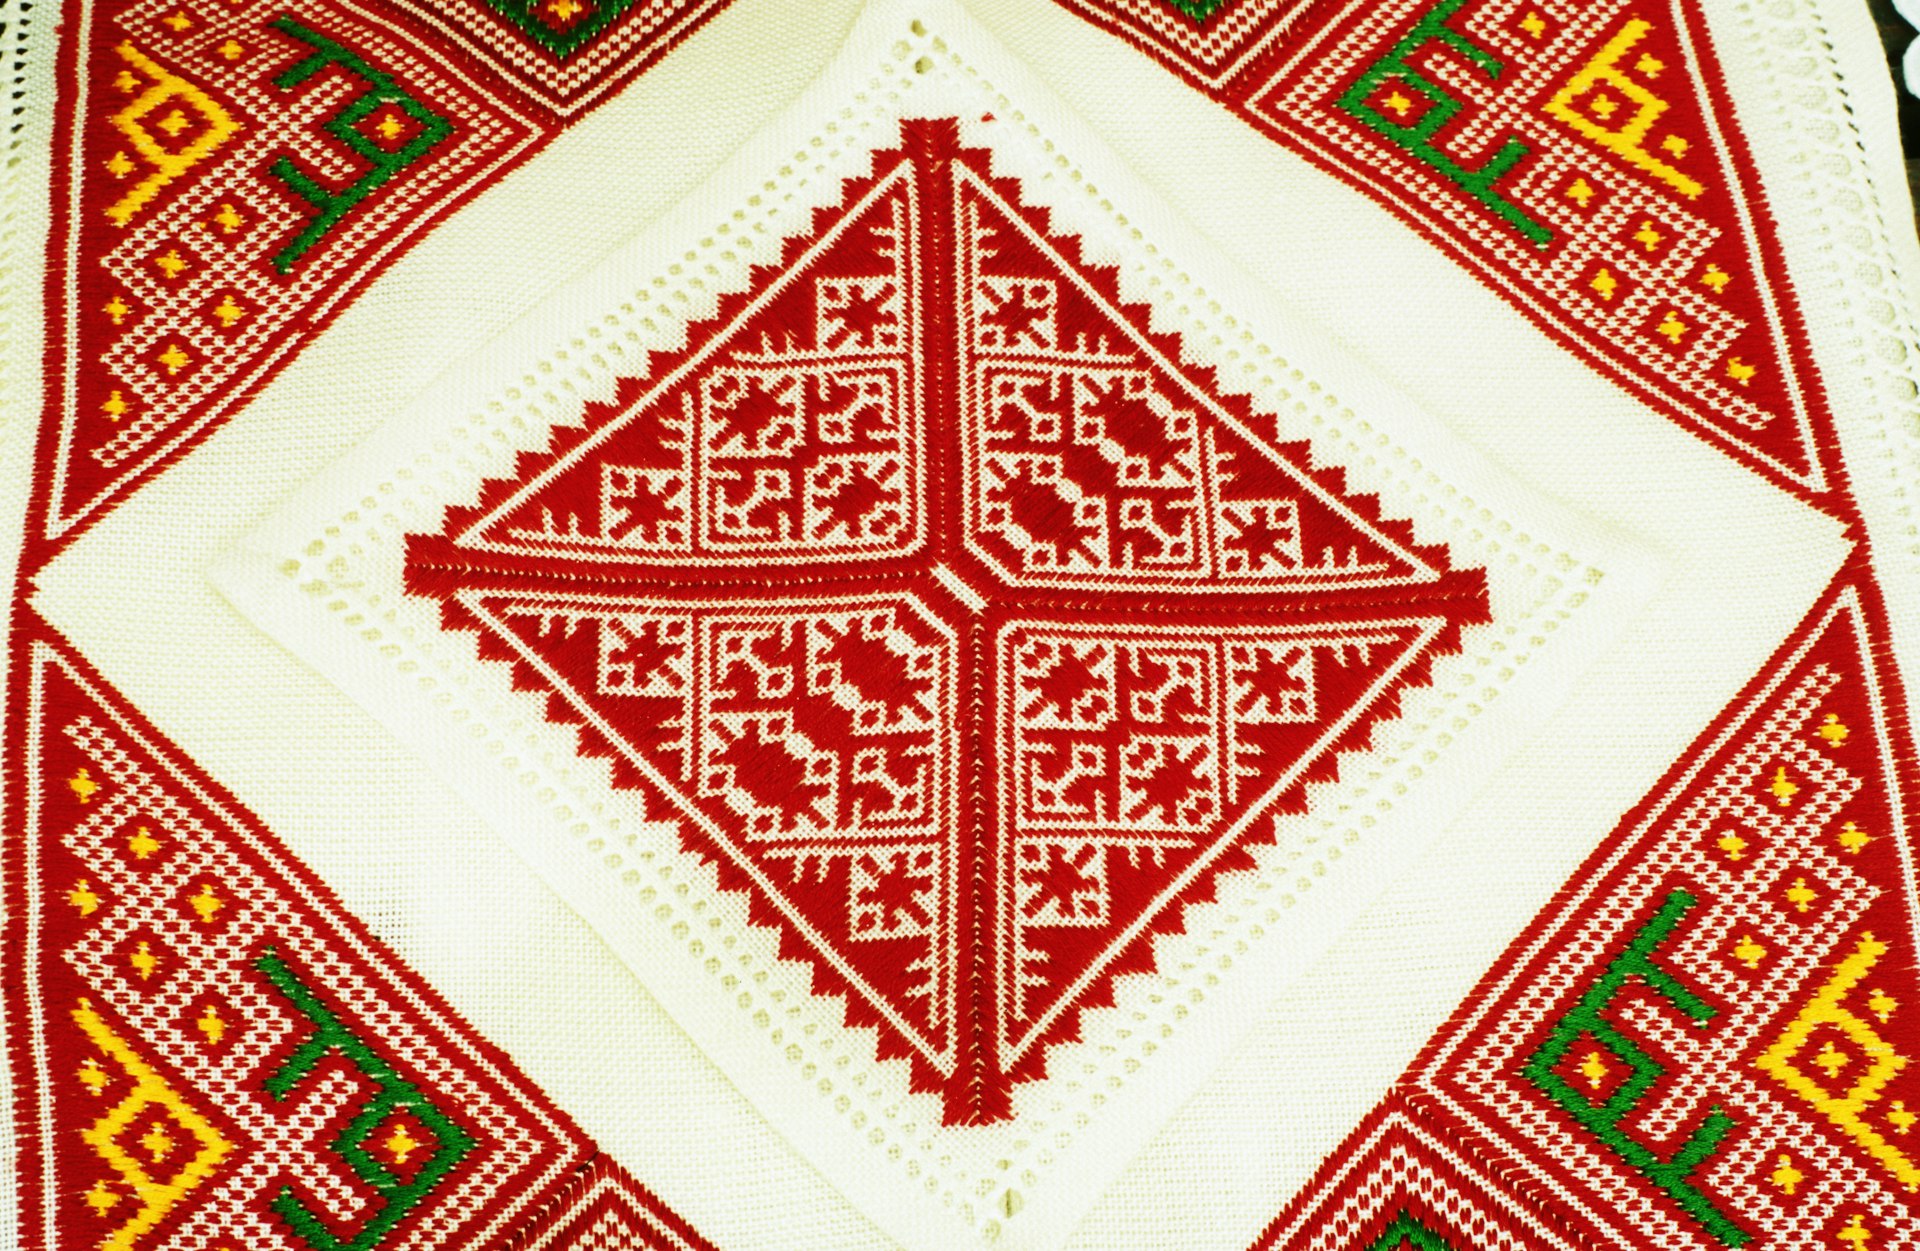 Detail of Croatian embroidery.